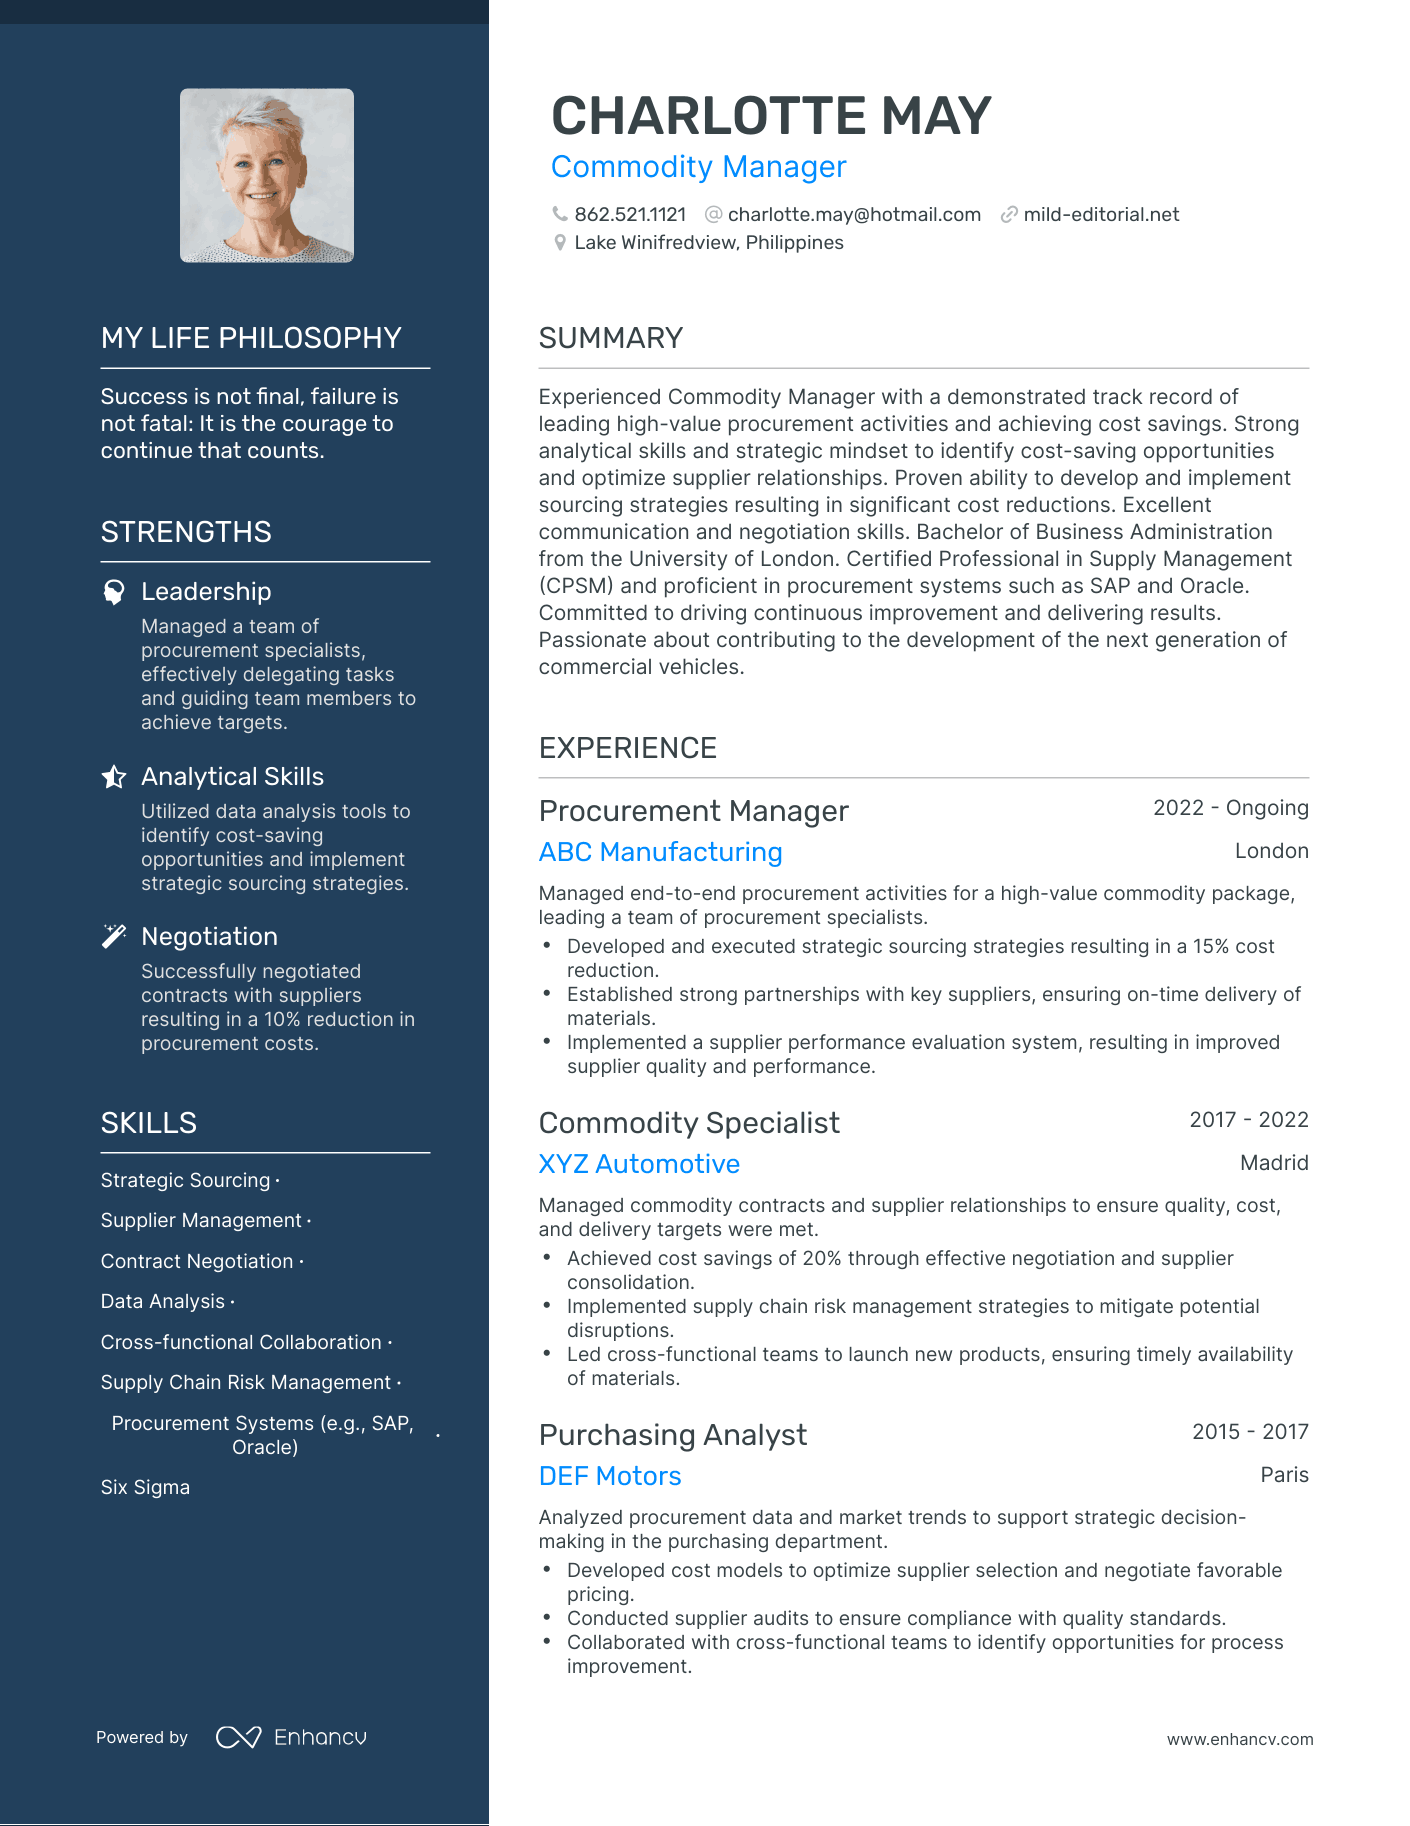 Commodity Manager resume example